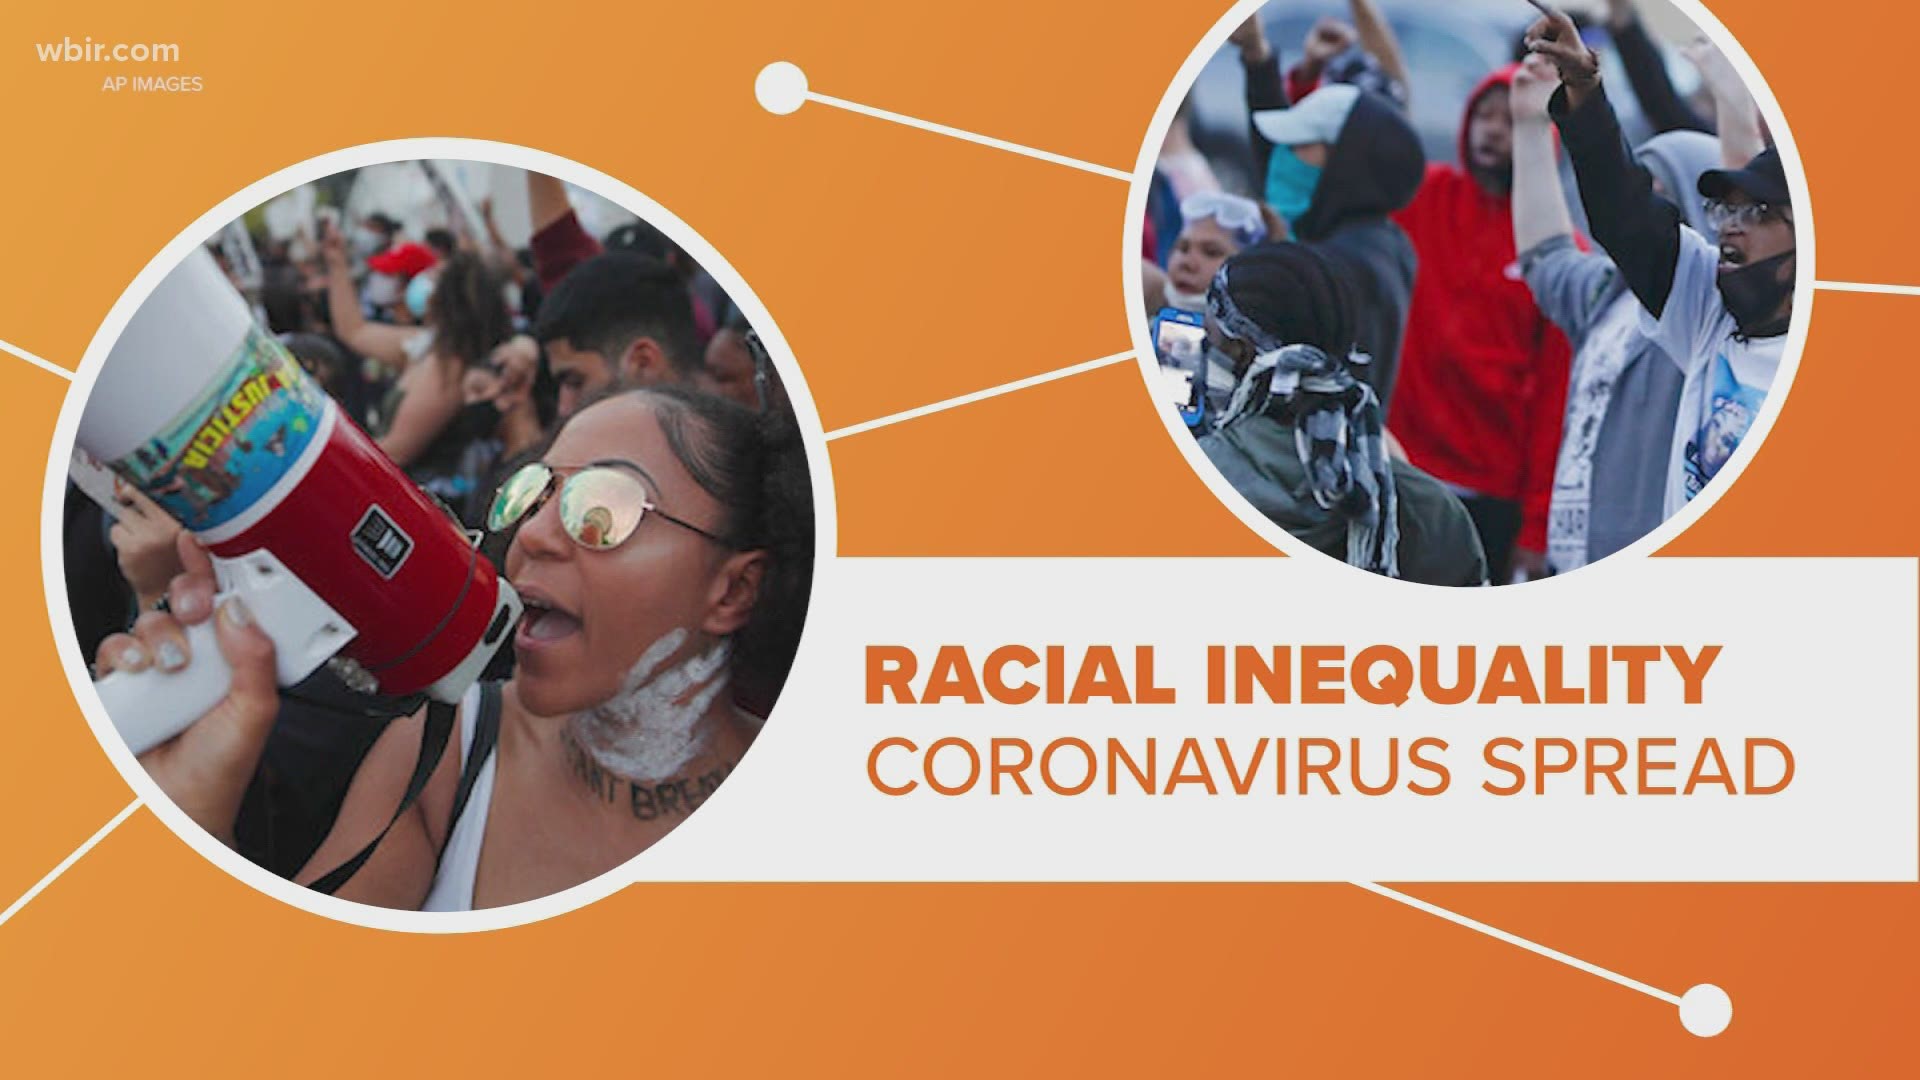 As protests against racism continue during this coronavirus pandemic, analysis shows that racial inequality may have played a role in how COVID-19 spread